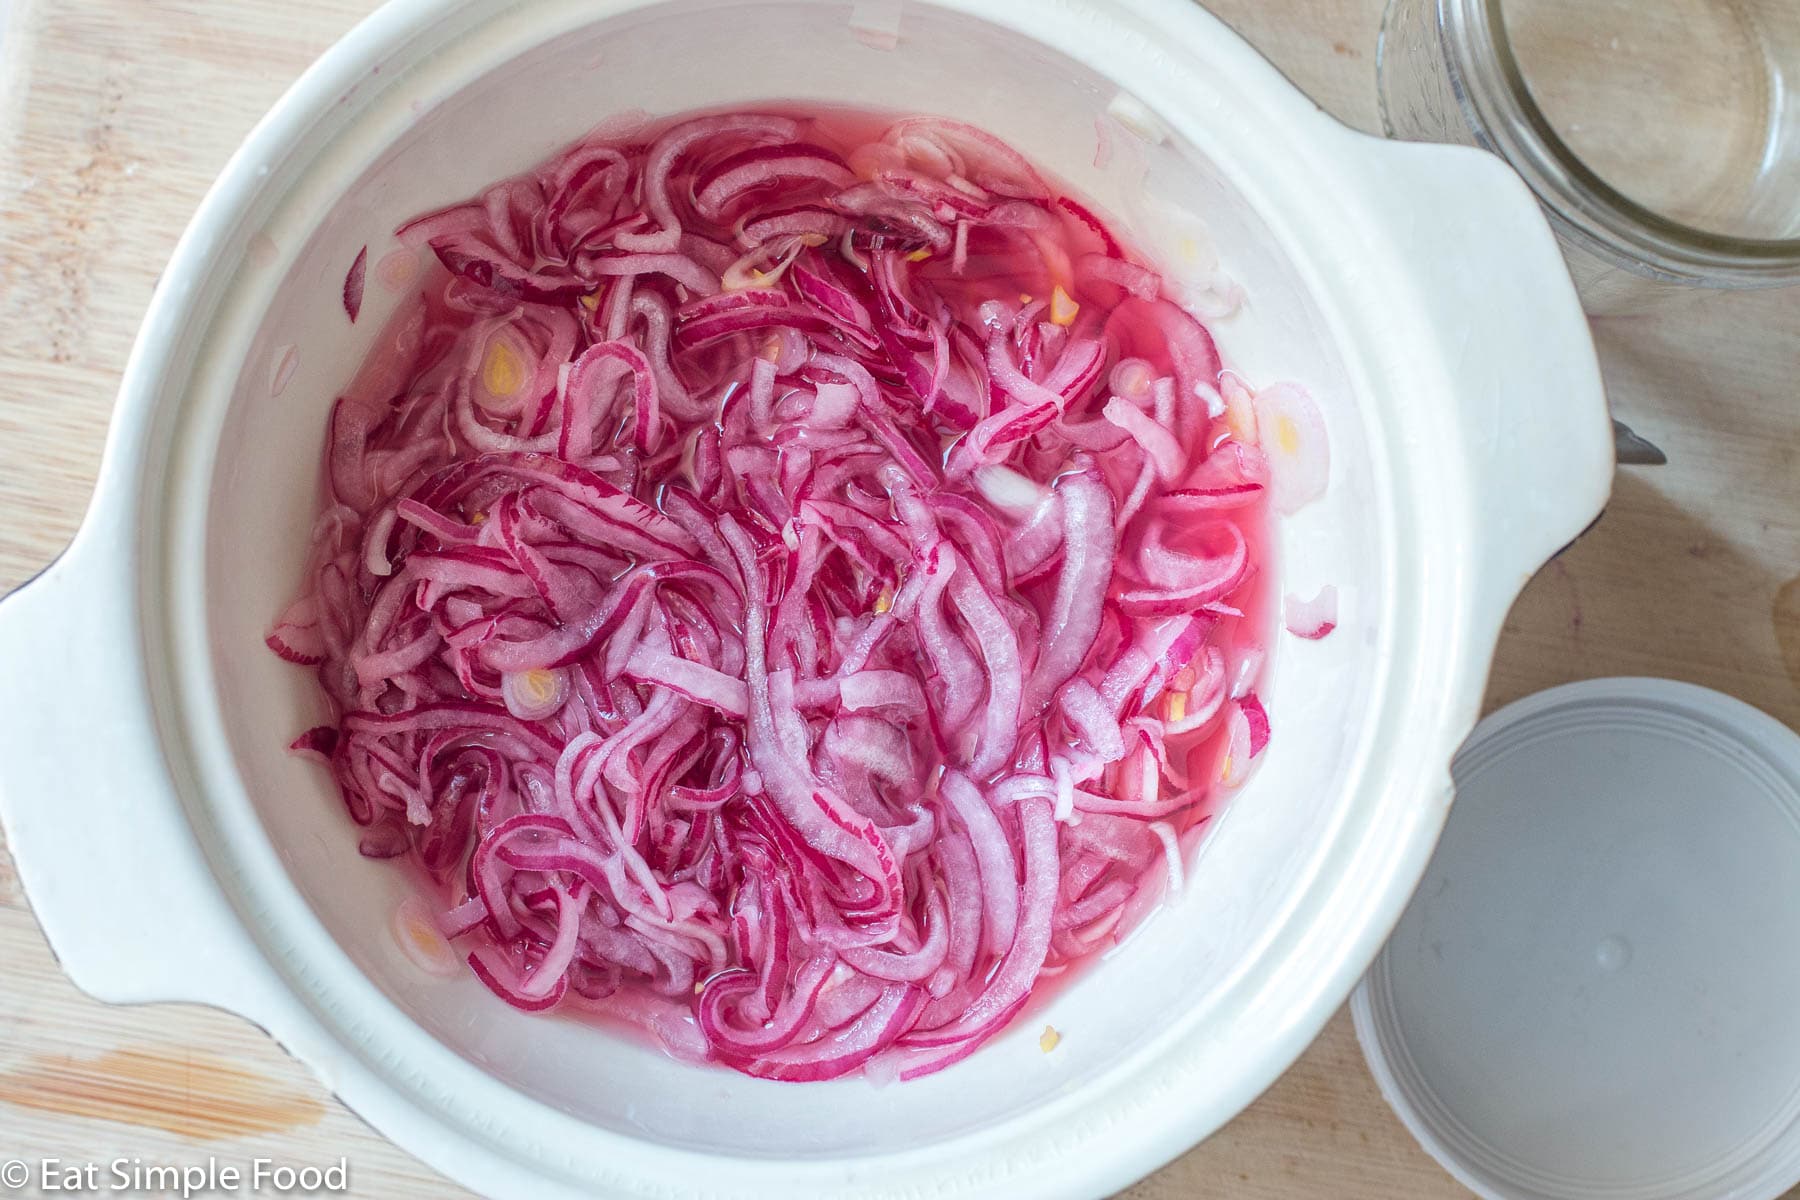 Top view of sliced marinated (wilted) red onions in a white bowl.